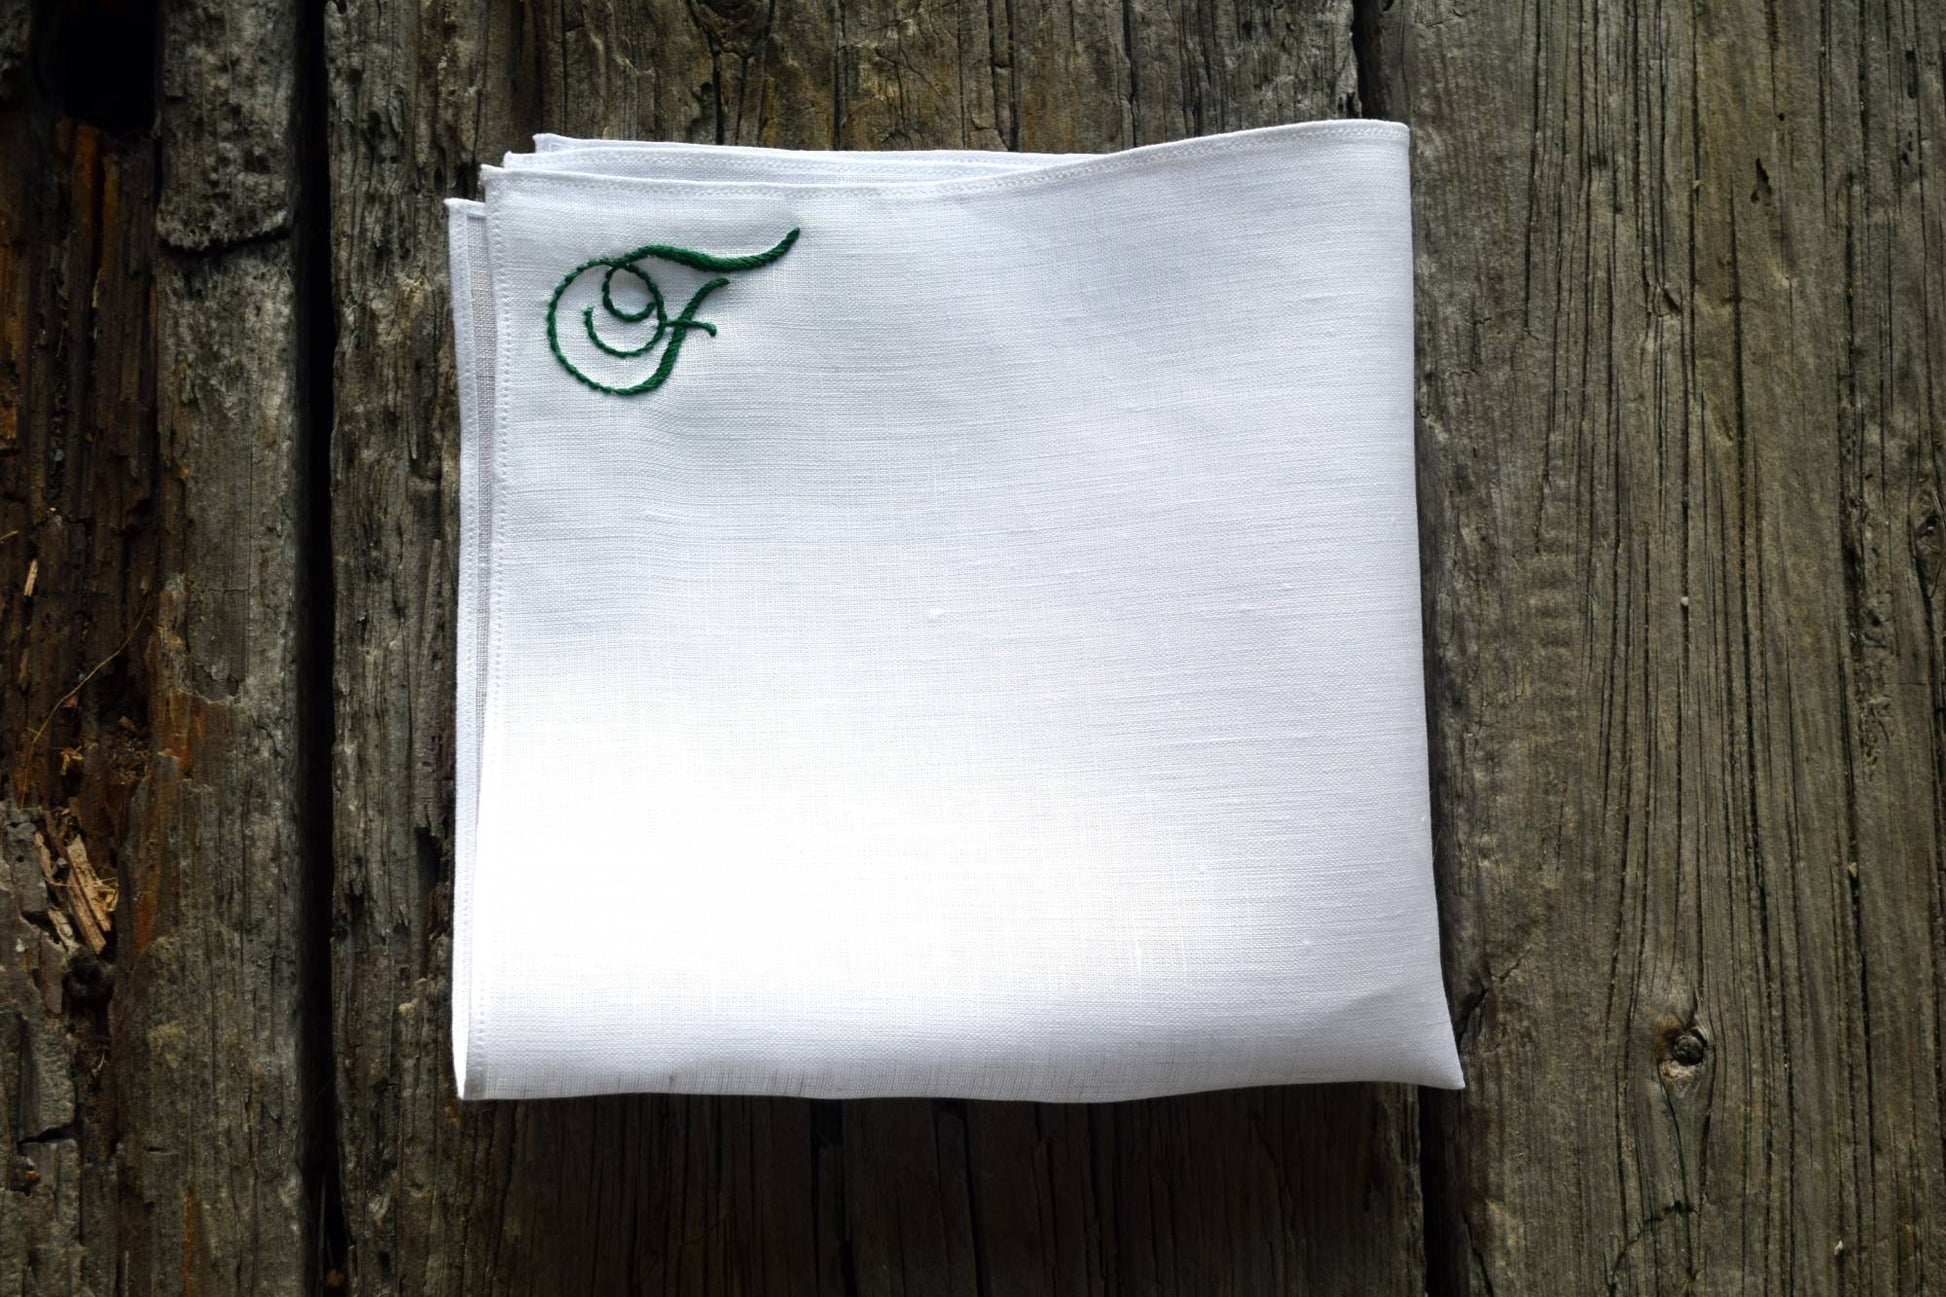 Folded white Irish linen handkerchief with hand embroidered green initial in top corner